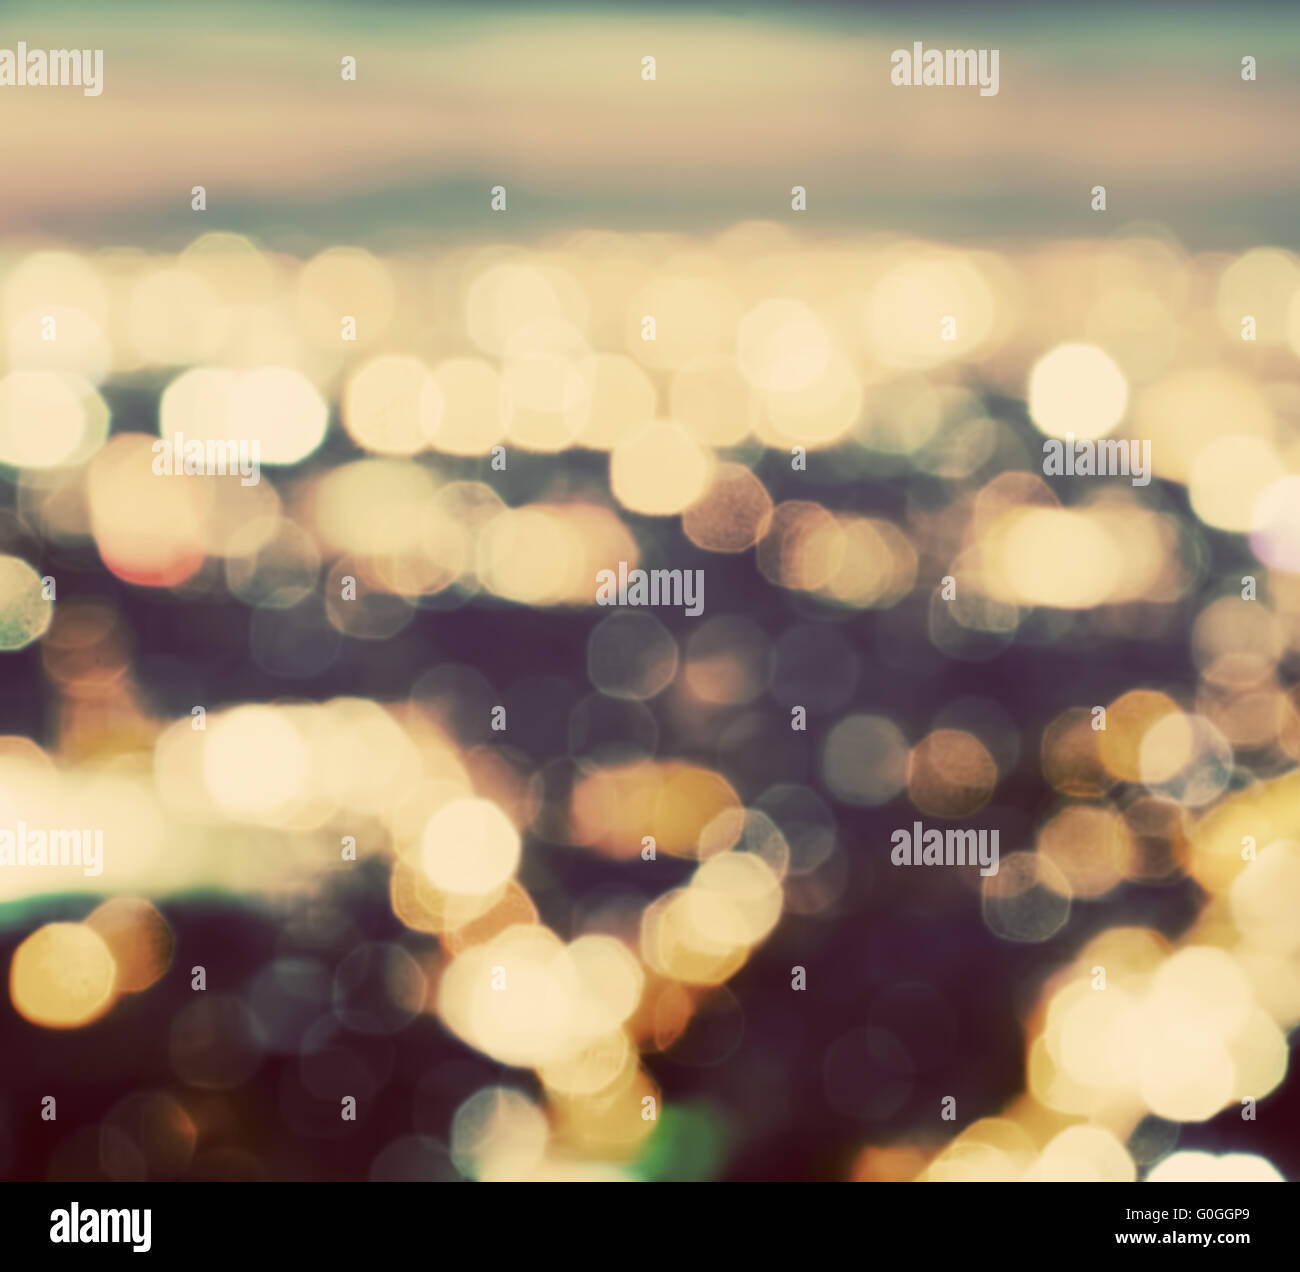 Bokeh, blur of a big city lights at night. Nightlife background Stock Photo